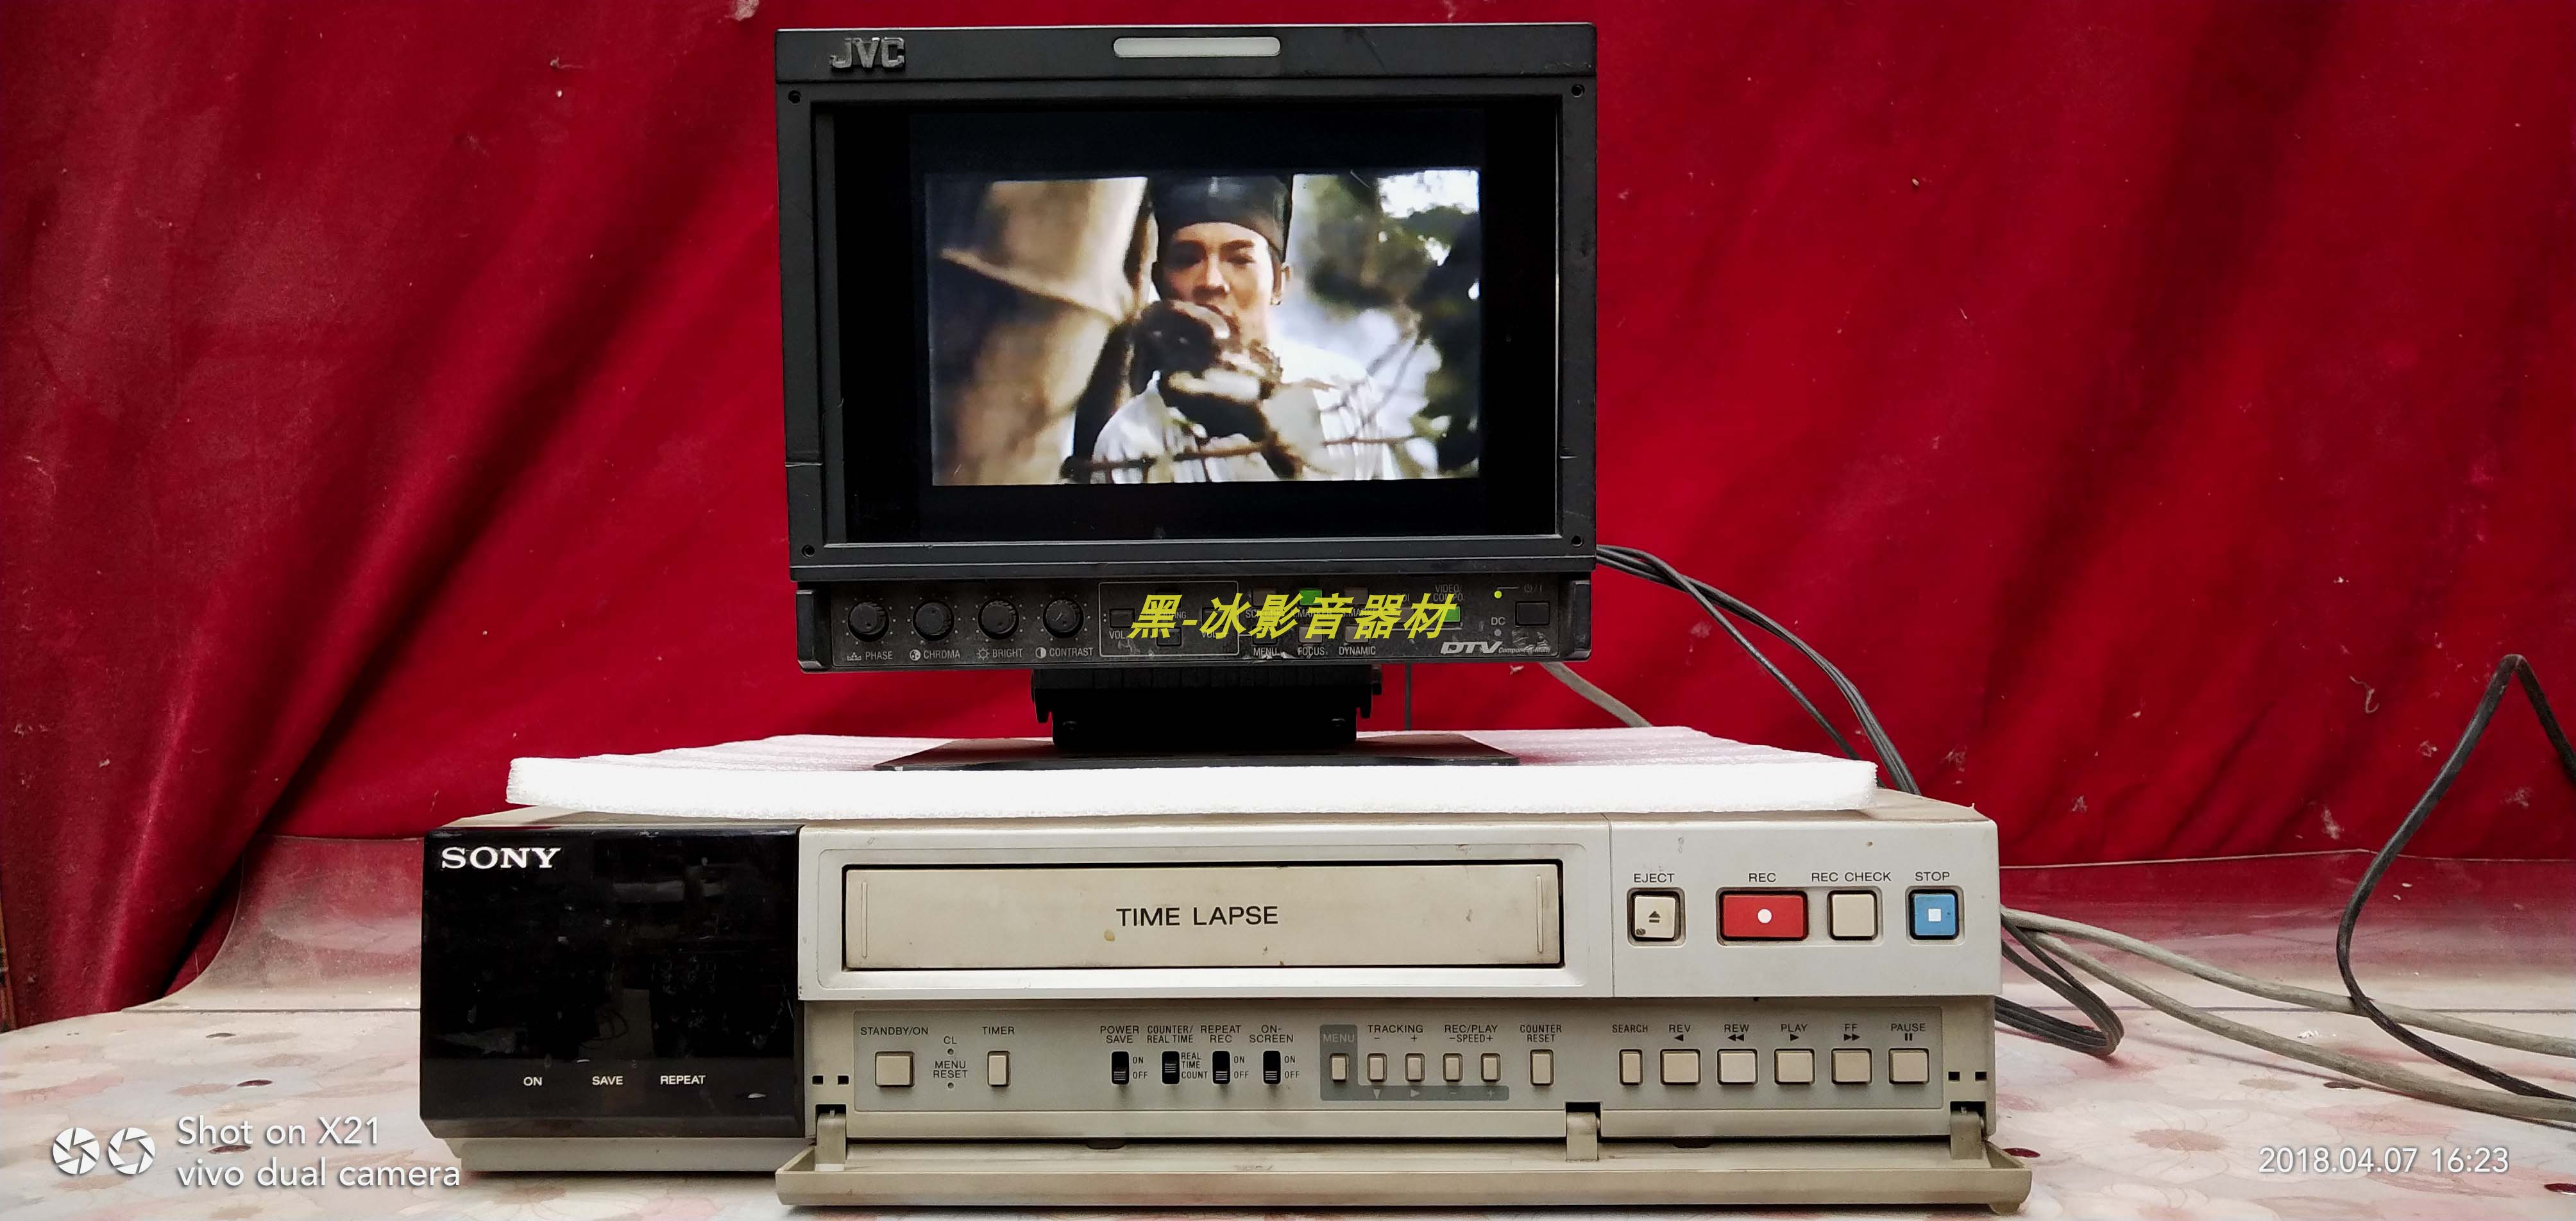 [Secondhand products]Sony SVT-96LP, a professional surveillance video recorder manufactured in Japan, can be used in home VHS video recorder Sony rewind machine